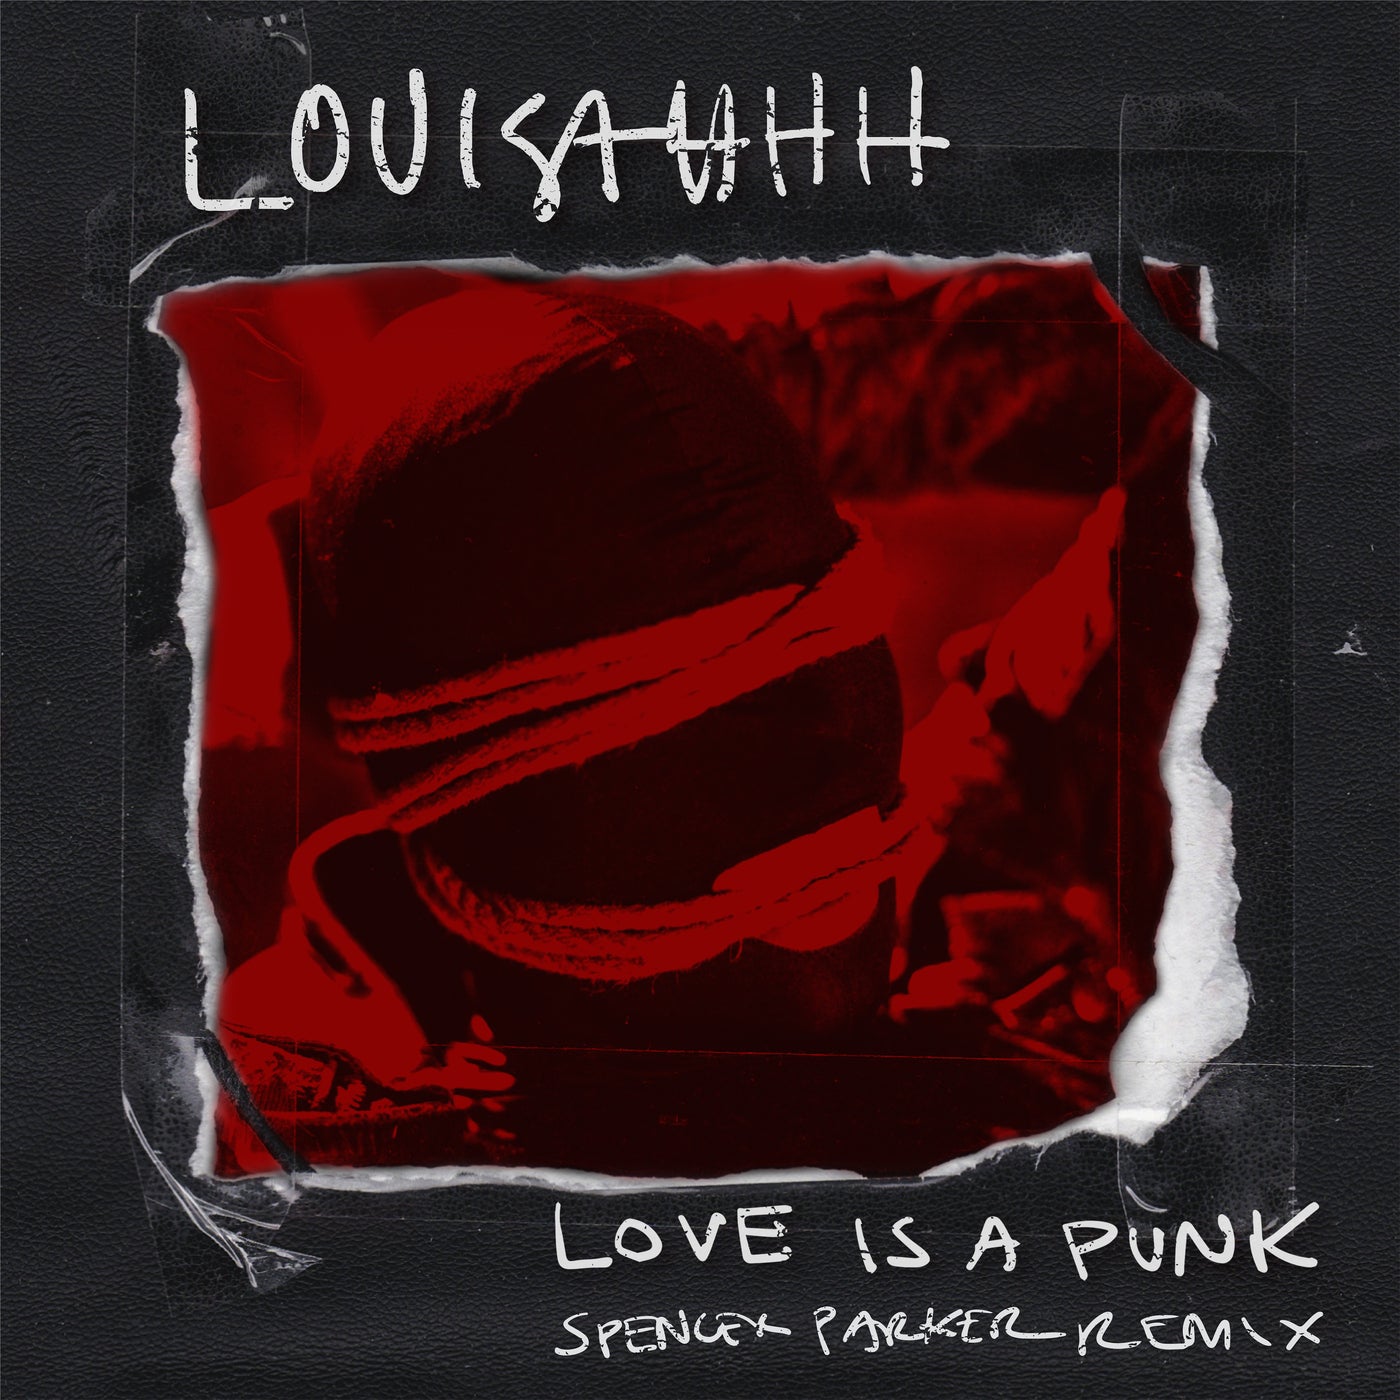 image cover: Louisahhh - Love Is a Punk (Spencer Parker Remix)